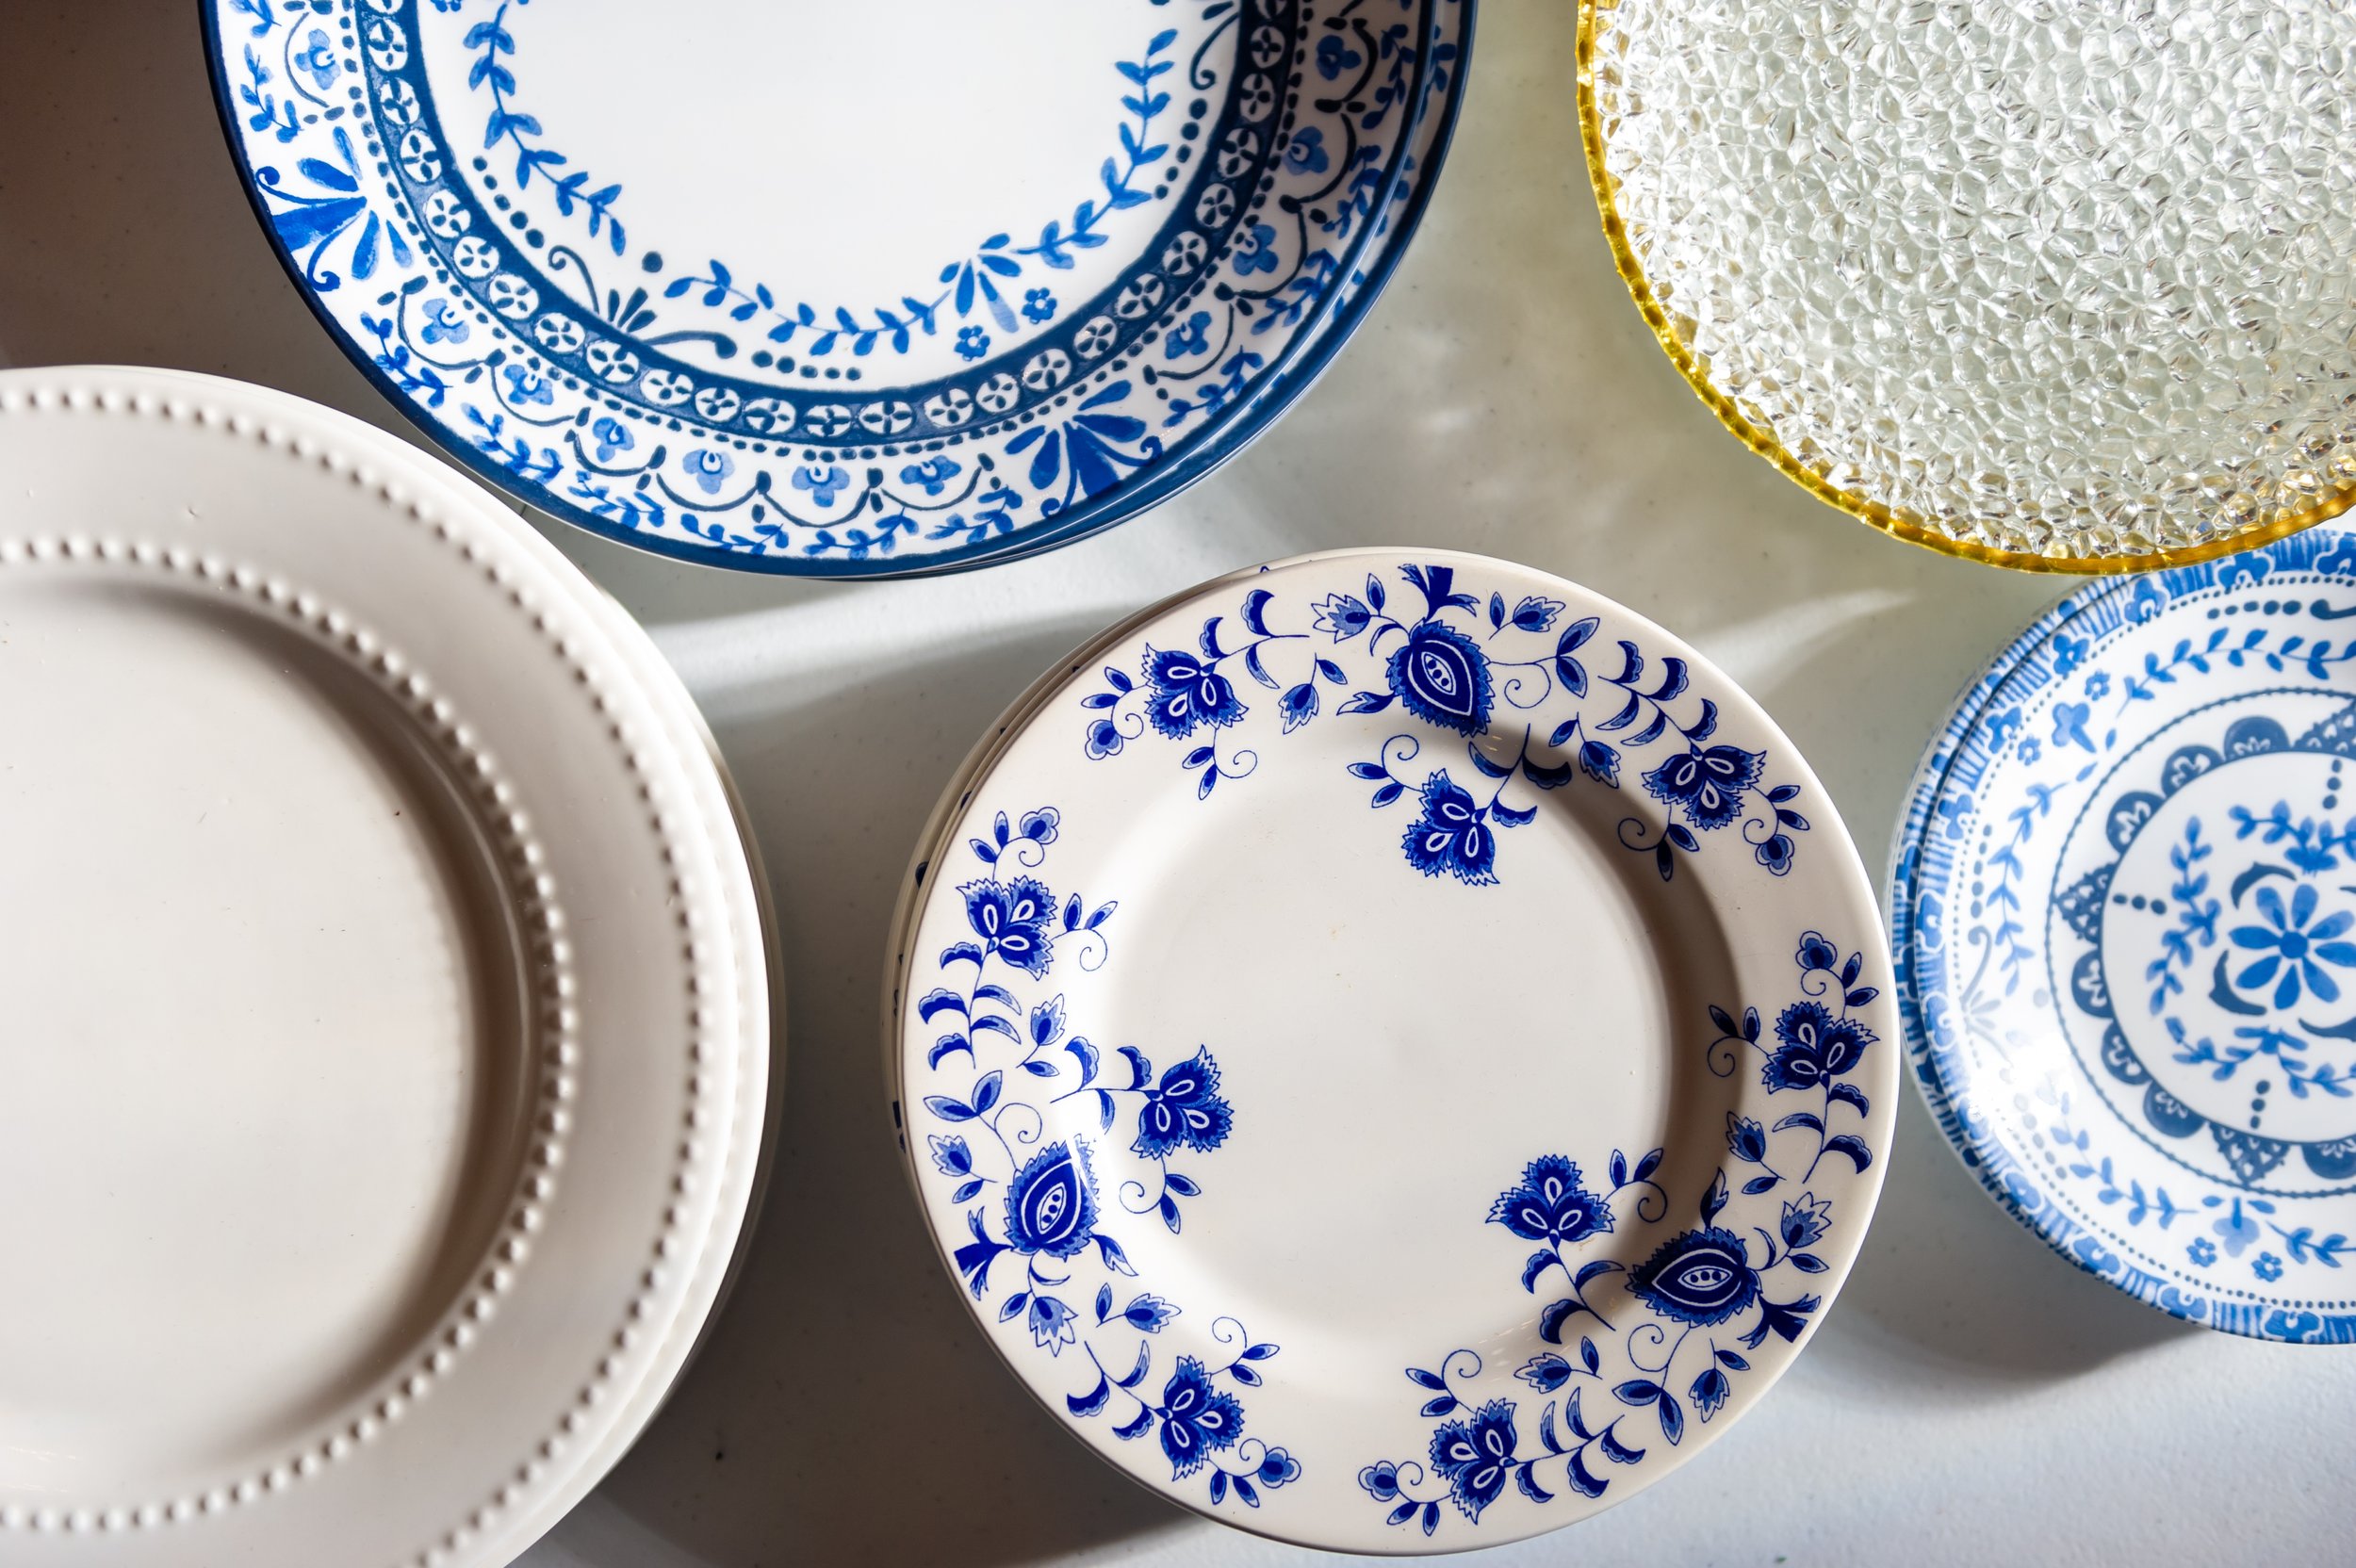 The Best Tabletop and Home Decor Finds For Entertaining